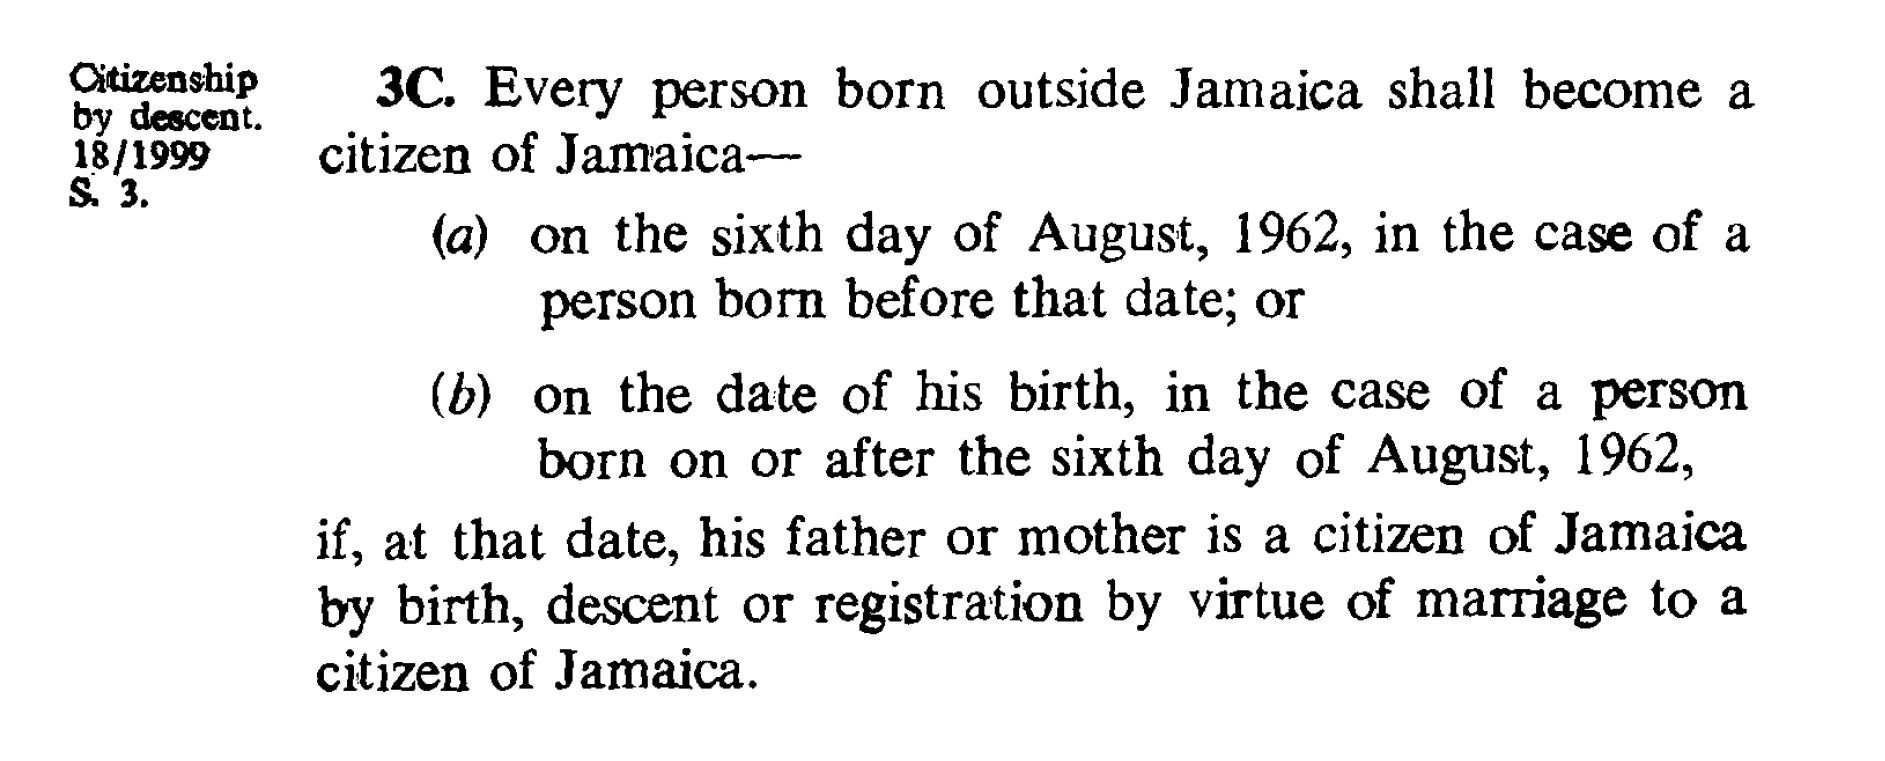 Section 3C(b), Citizenship by decent, Jamaica (Constitution) Order in Council 1962. (Jul. 25, 1962). Caribbean and North Atlantic Territories, Statutory Instruments, 1962 No. 1550, Amendments through 2011 appended. Queen Elizabeth and Privy Council.